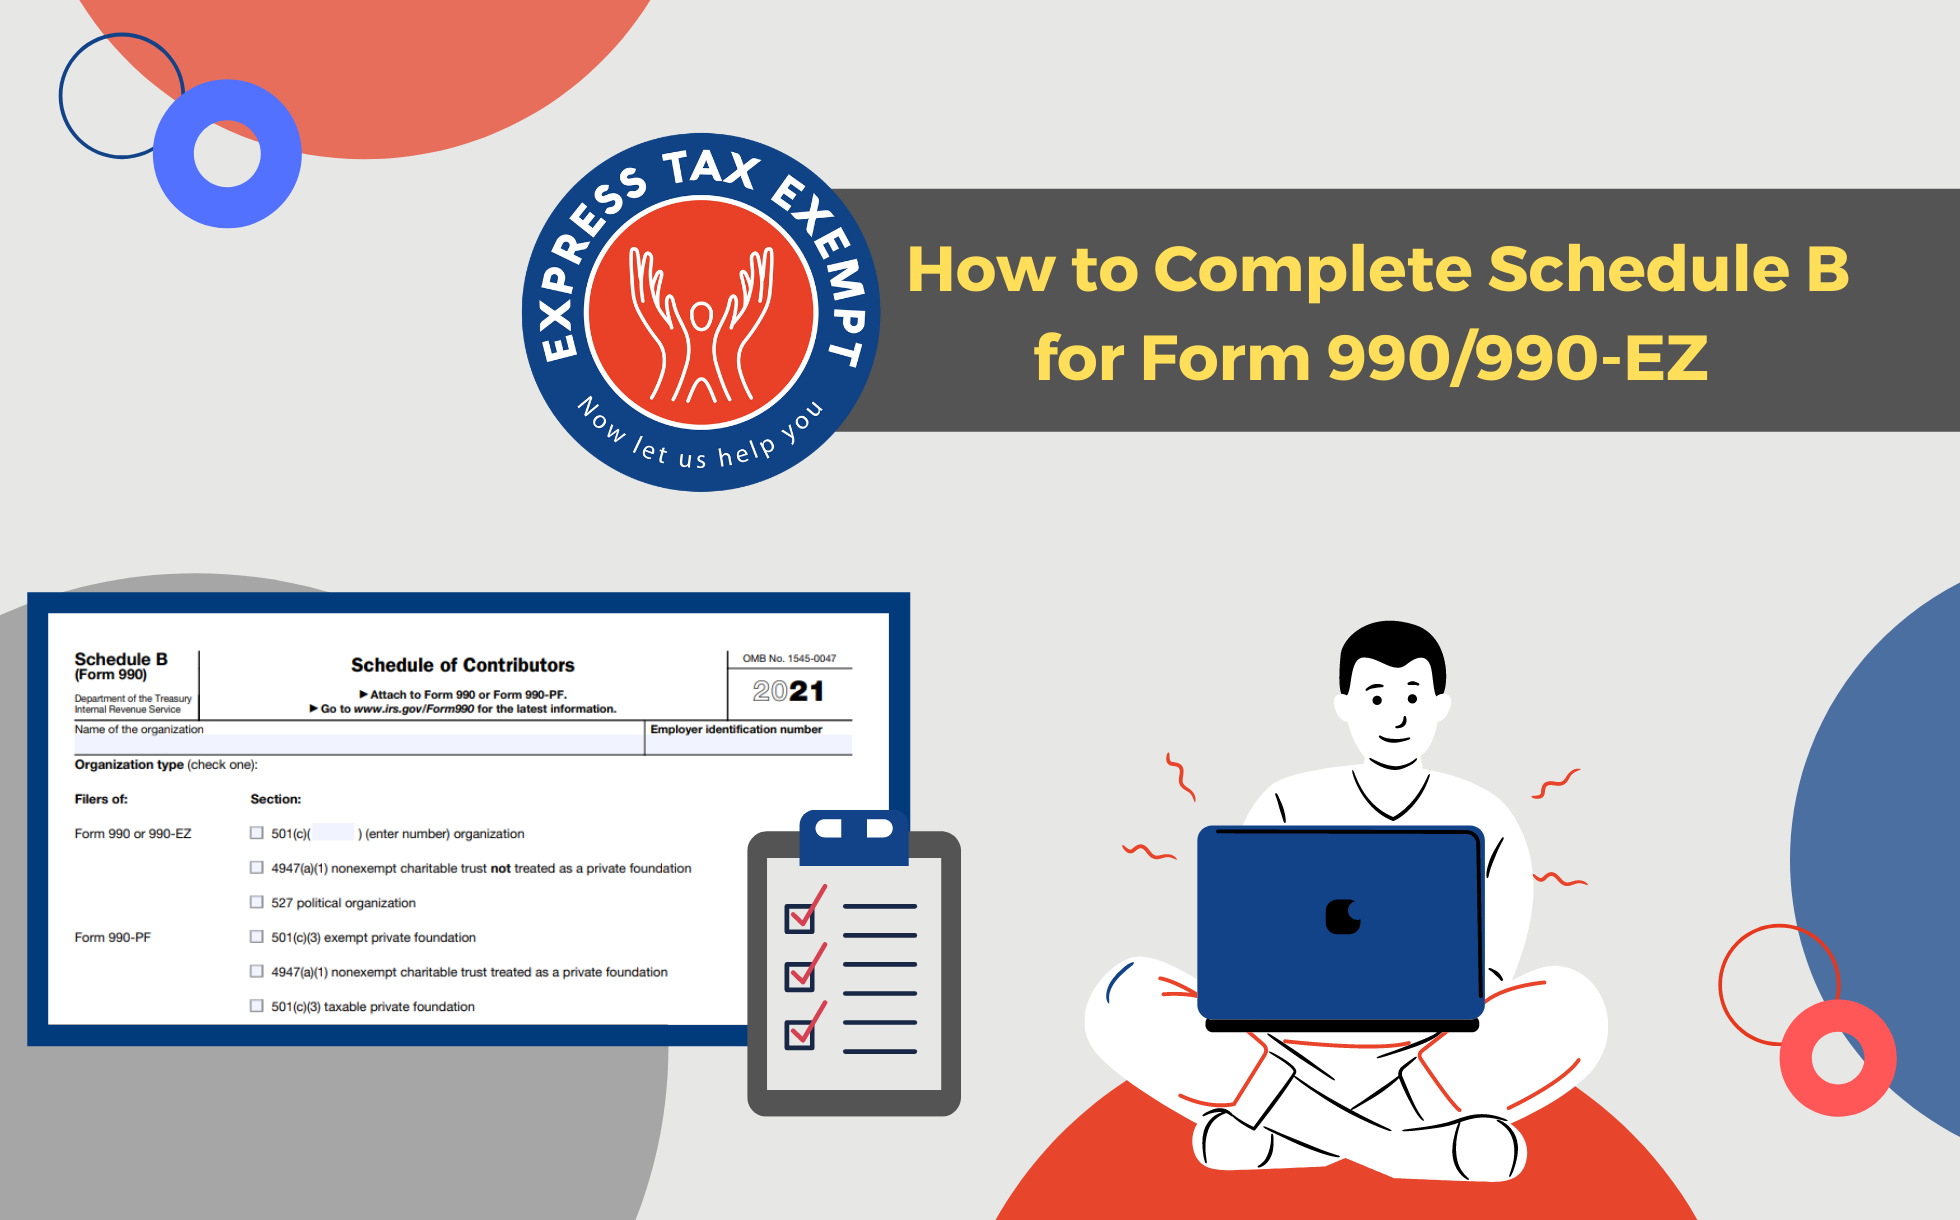 How to Complete Schedule B for Form 990/990-EZ